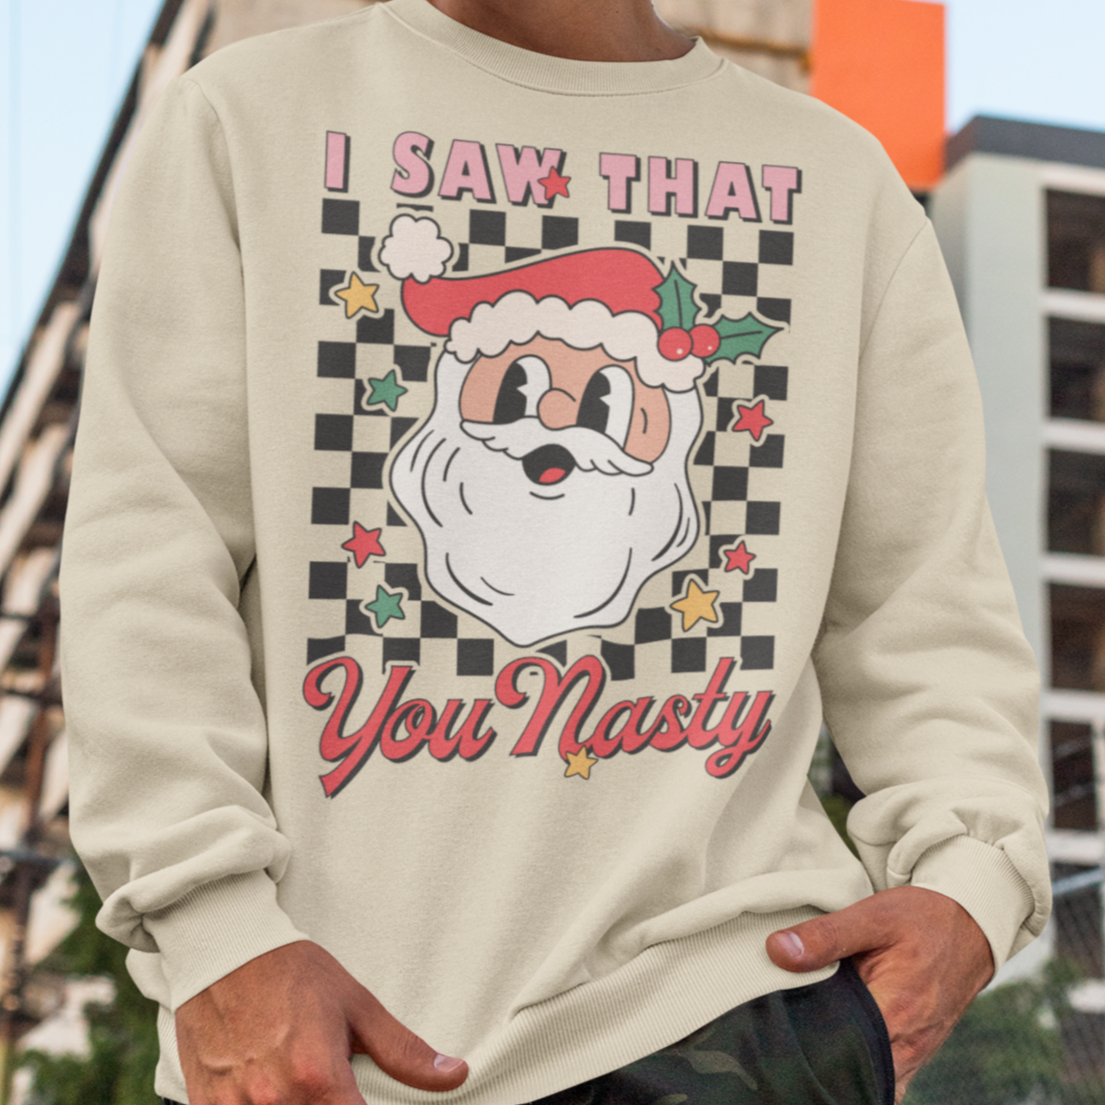 I Saw That You Nasty - Unisex Ugly Sweater, Christmas, Winter, Fall